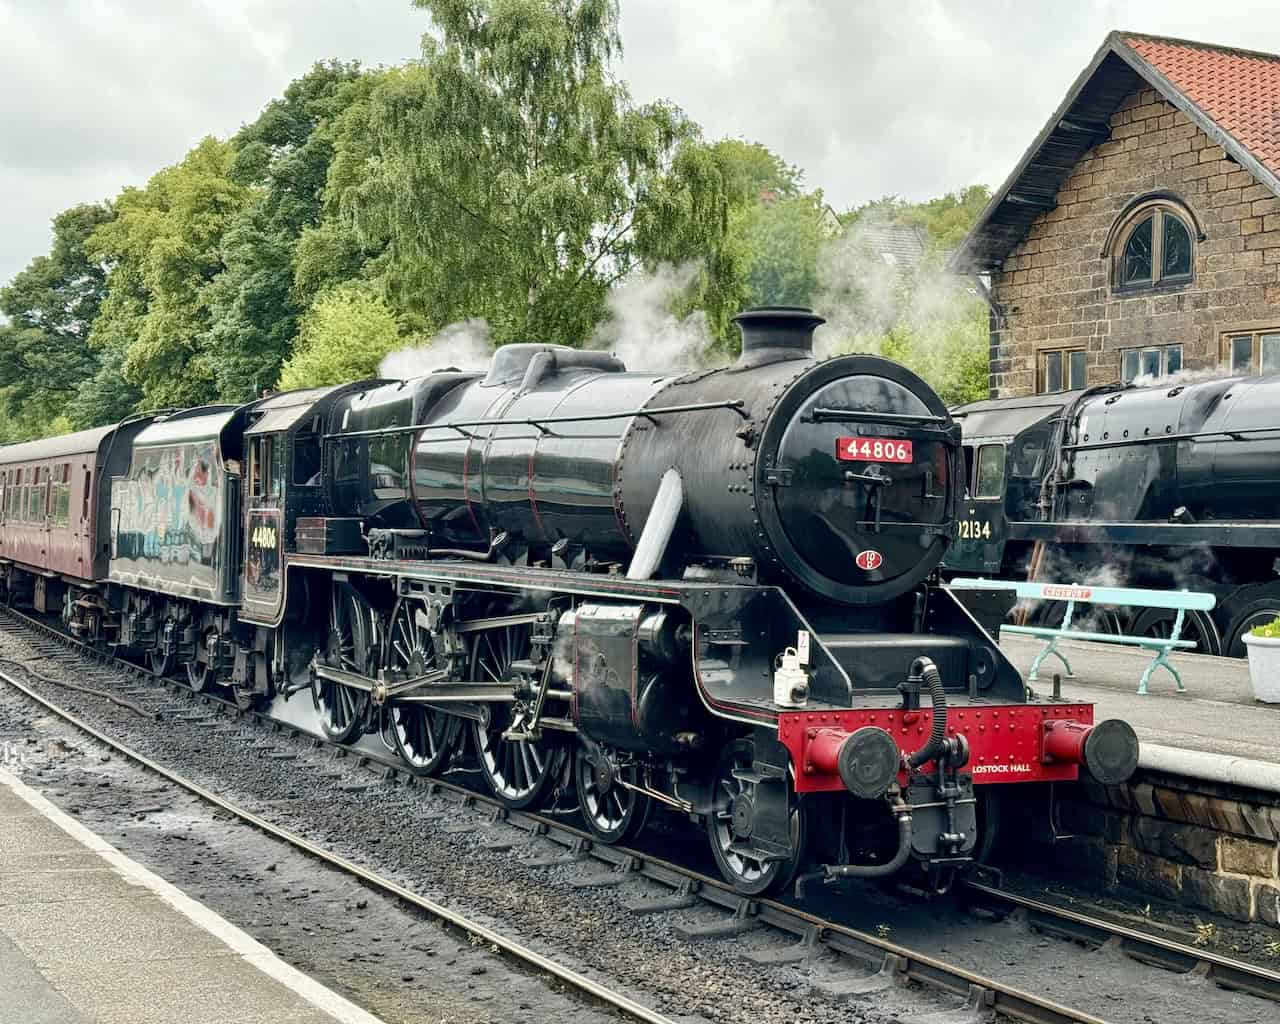 Steam locomotive 44806, known as 'Kenneth Aldcroft,' at Grosmont Railway Station. Built in 1944, the locomotive has a rich history and was overhauled to ensure its continued operation. This is a highlight of my Goathland to Grosmont walk.